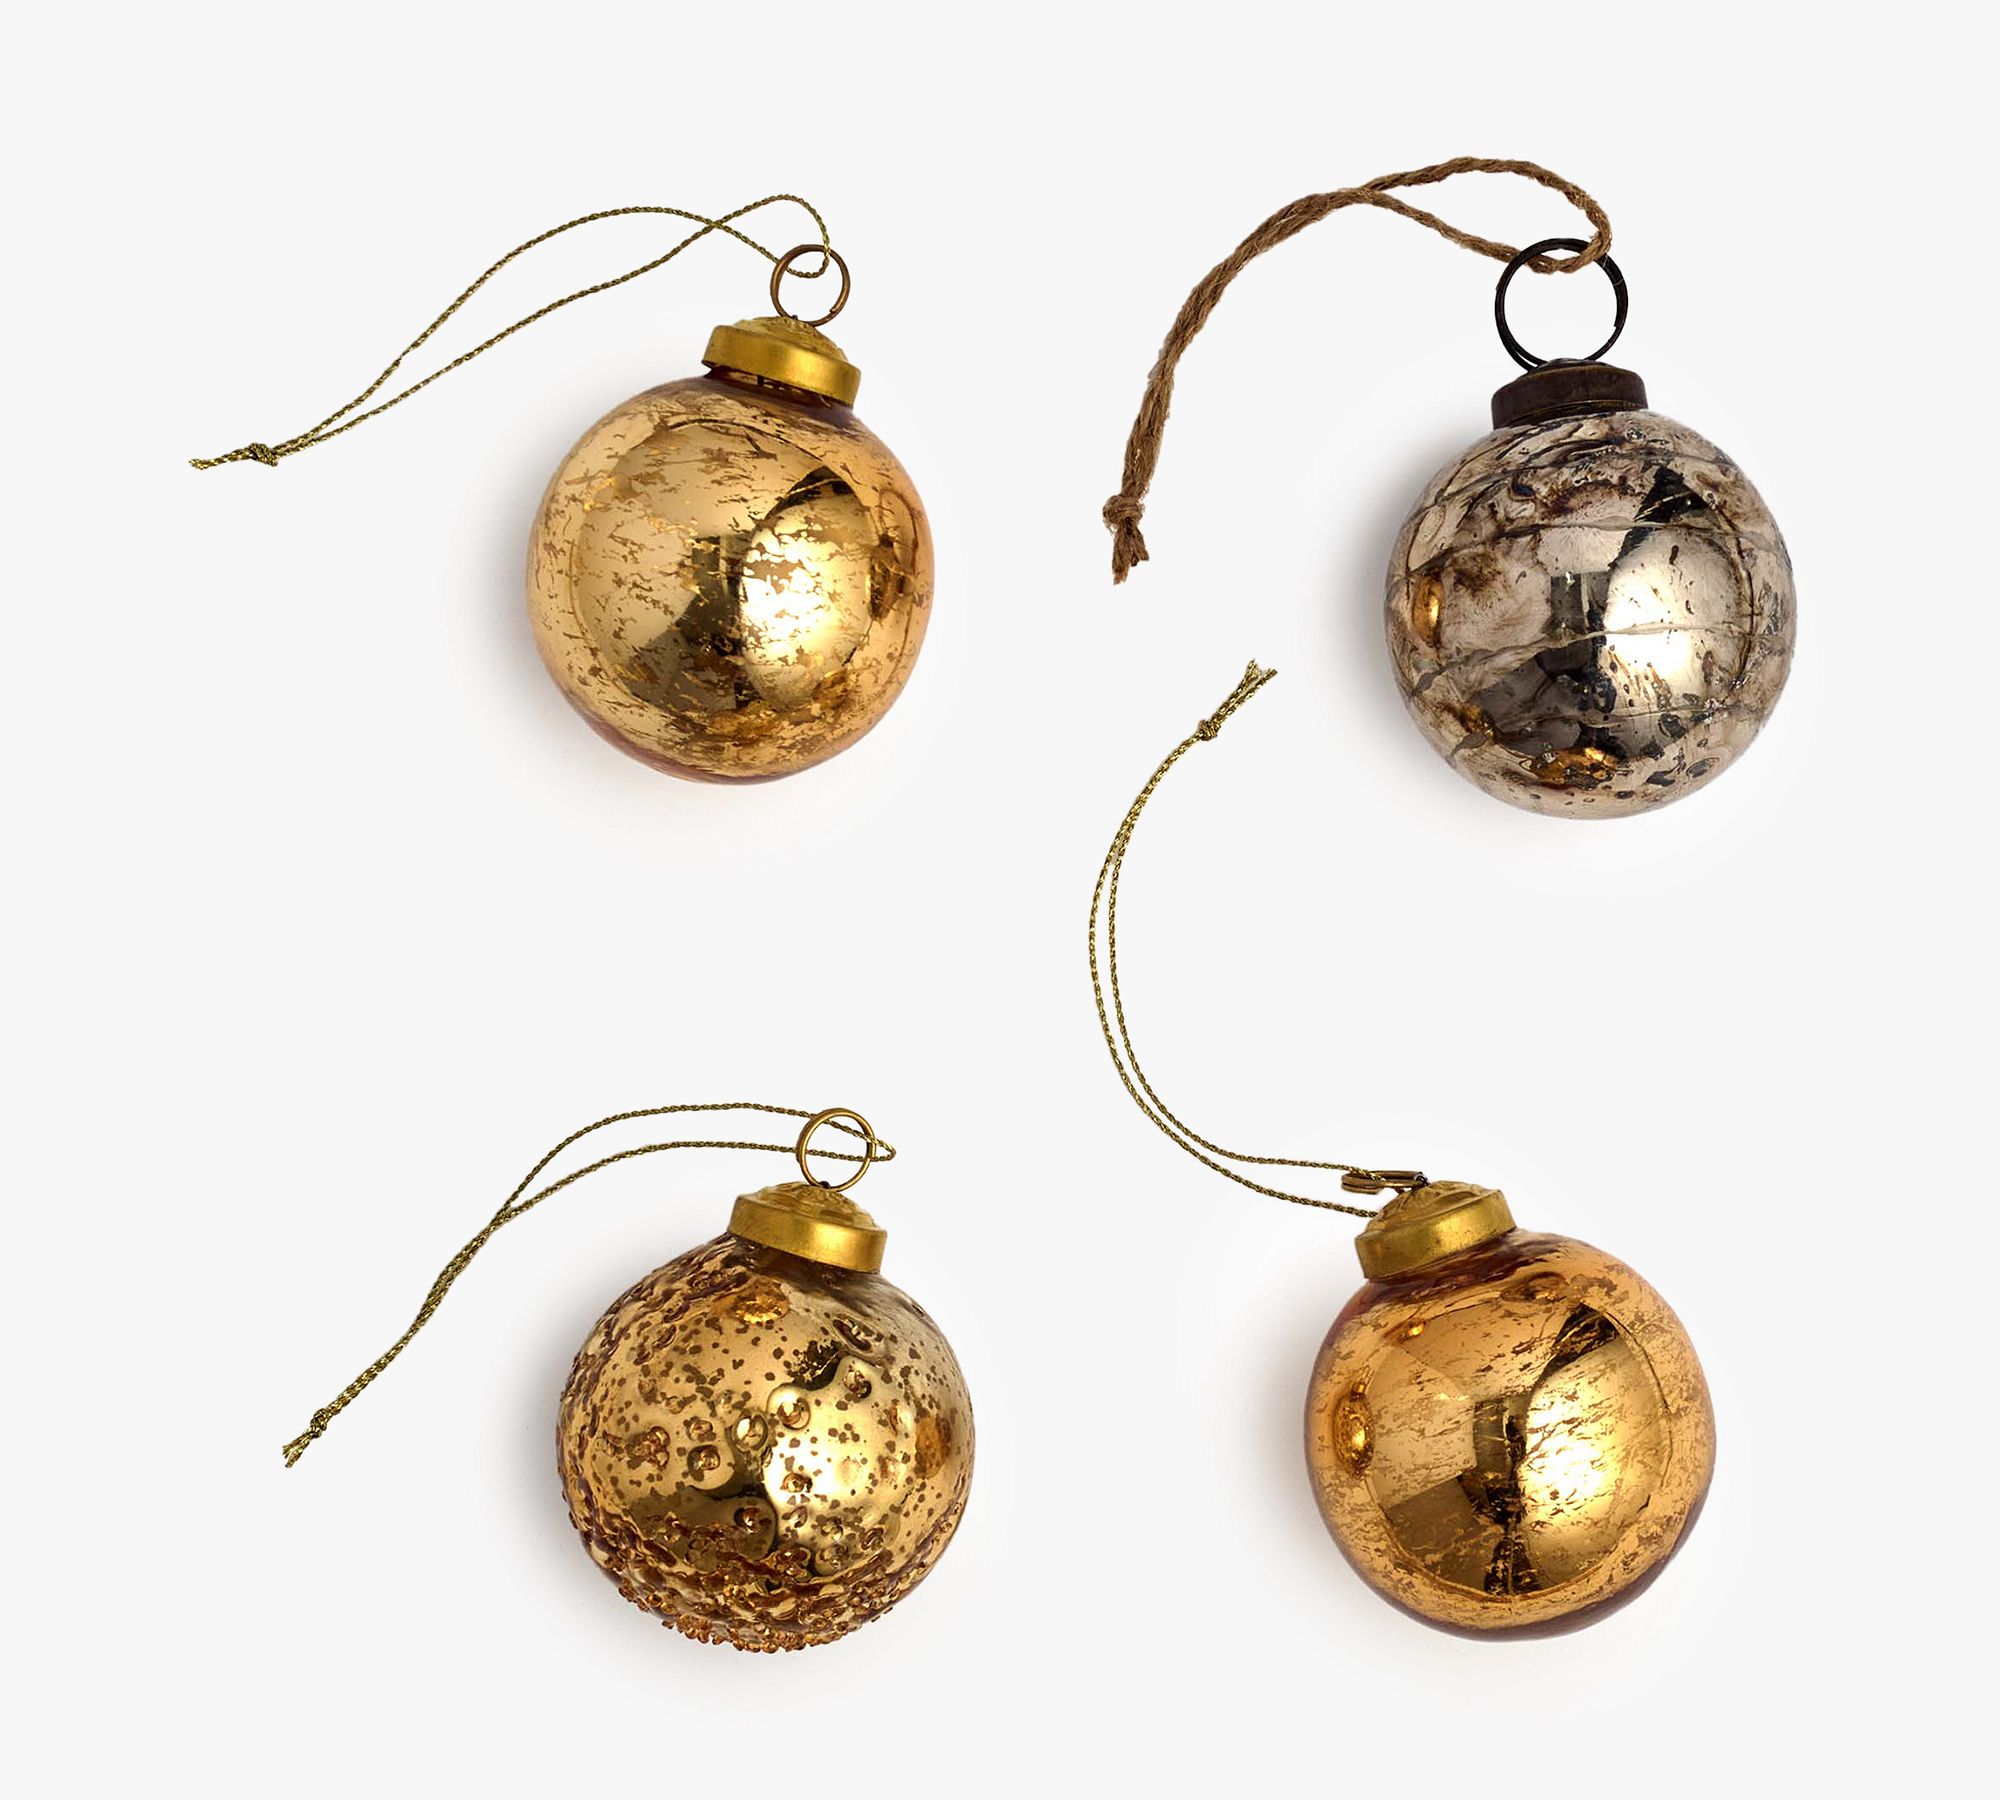 Mouth Blown Round Ornaments - Set of 4